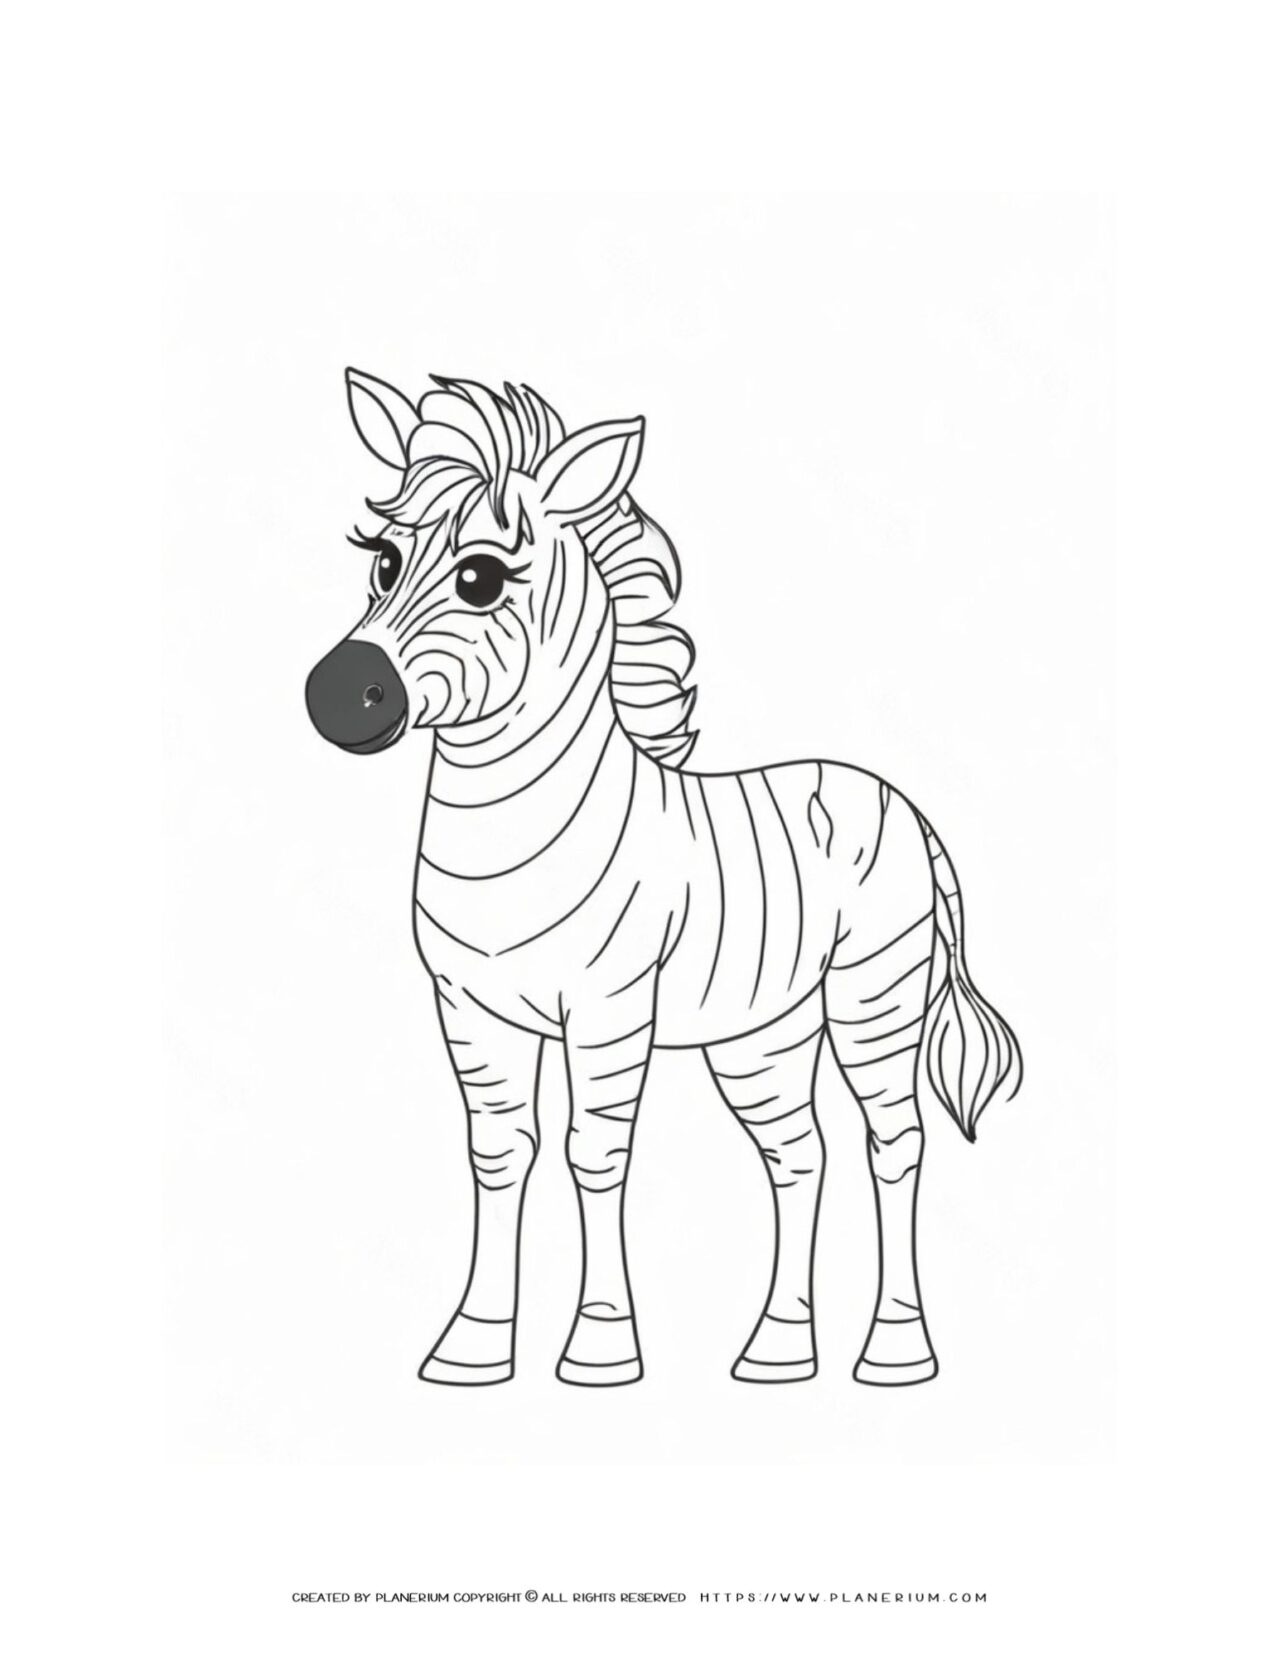 Cute-Zebra-Coloring-Page-for-Kids